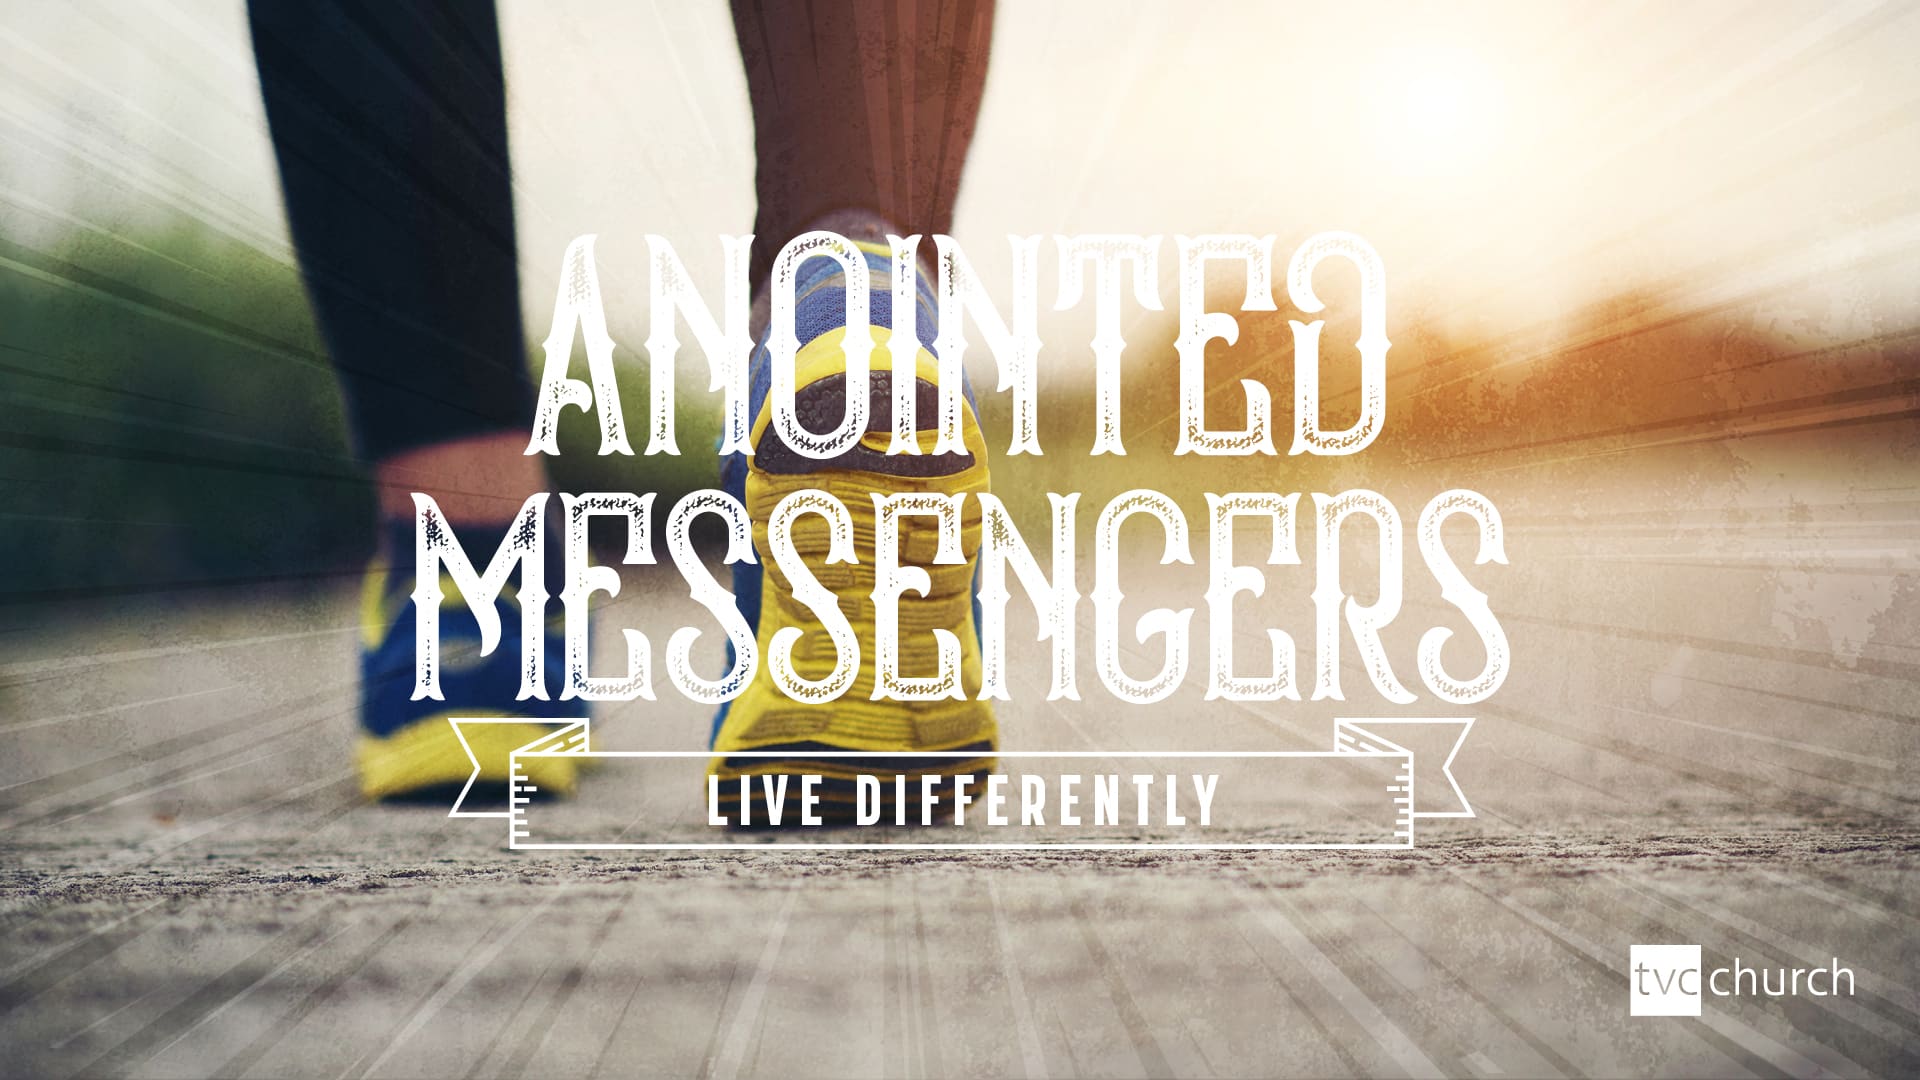 Anointed Messengers…live differently